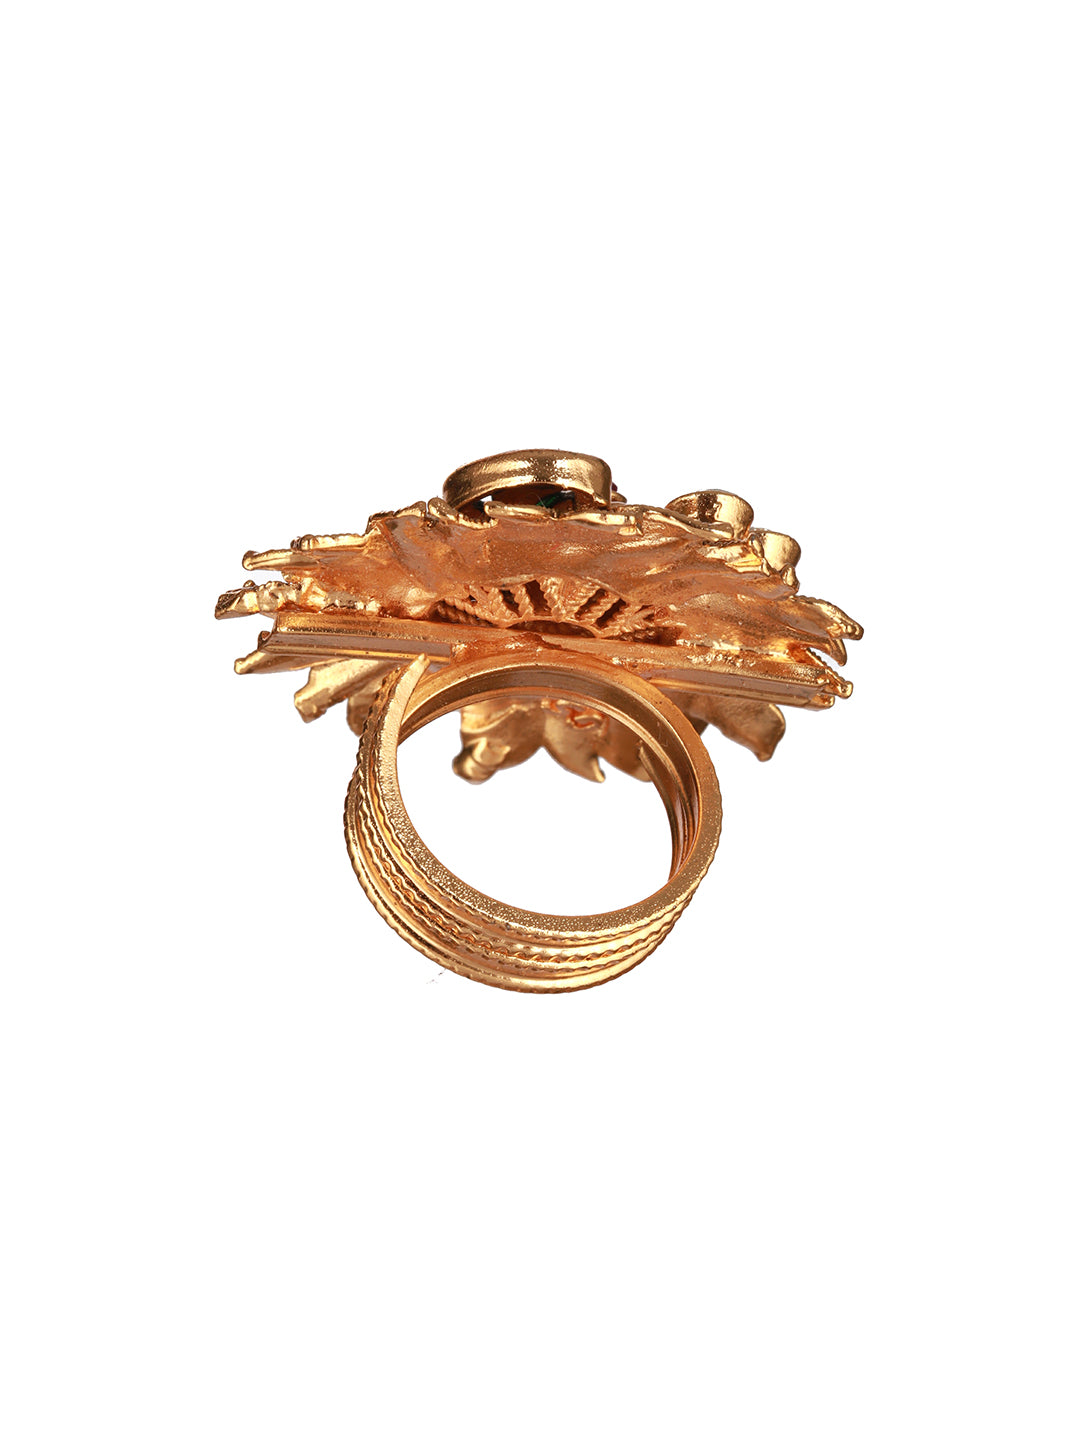 Multicolor Studded Peacock Meenakari Gold-Plated Ring